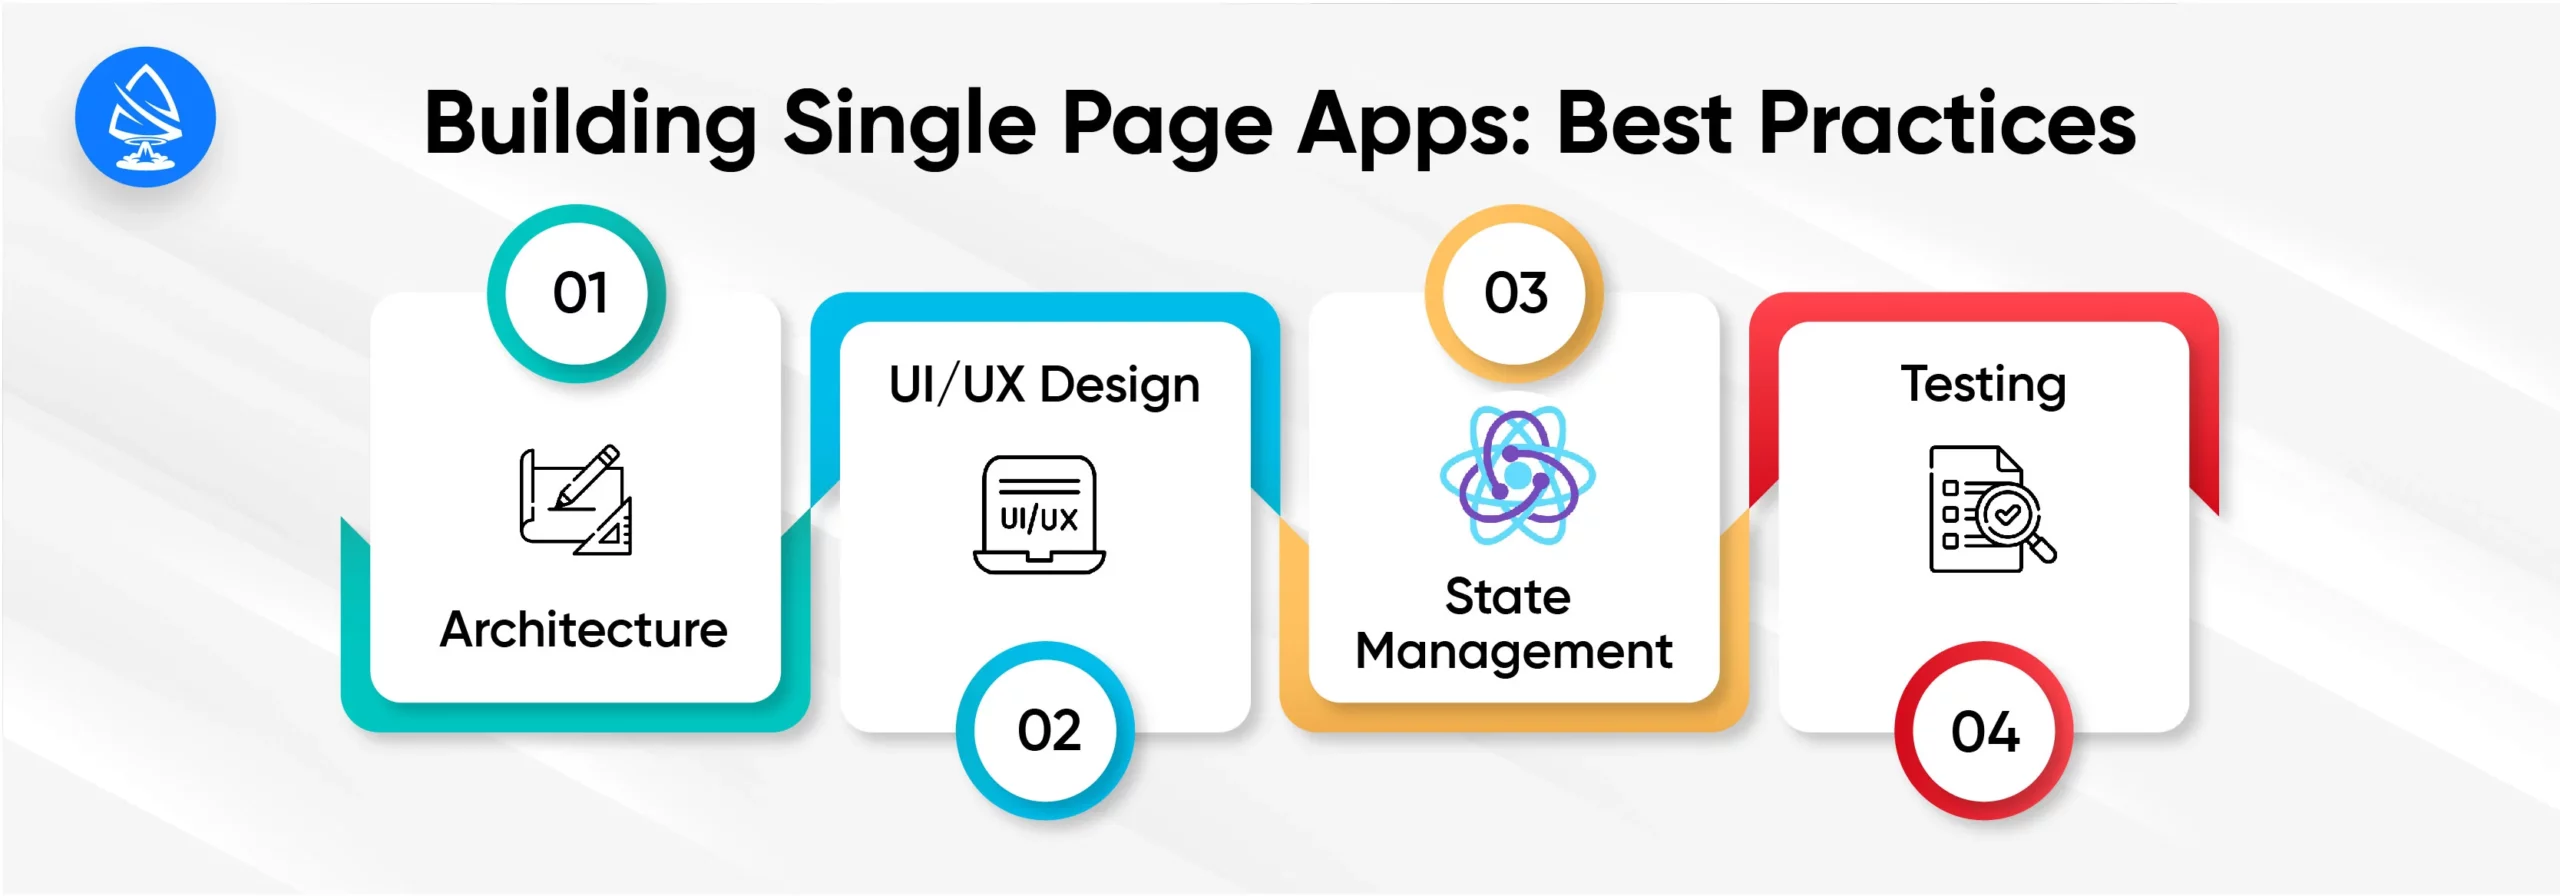 Building Single Page Apps: Best Practices